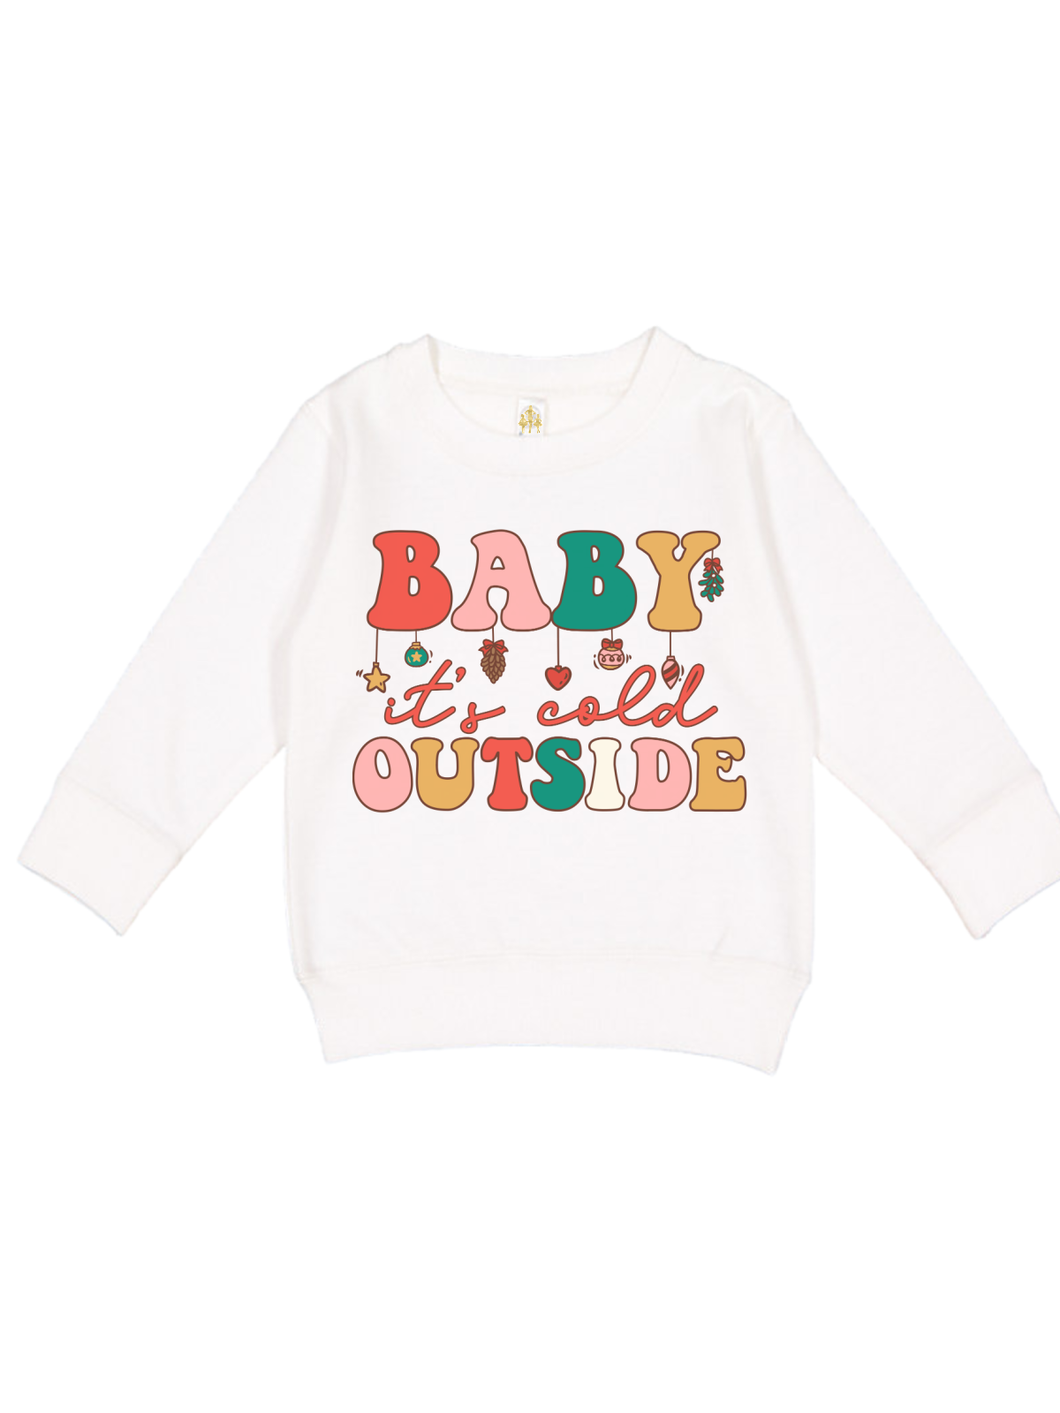 Baby It's Cold Outside Kids Holiday Sweatshirt